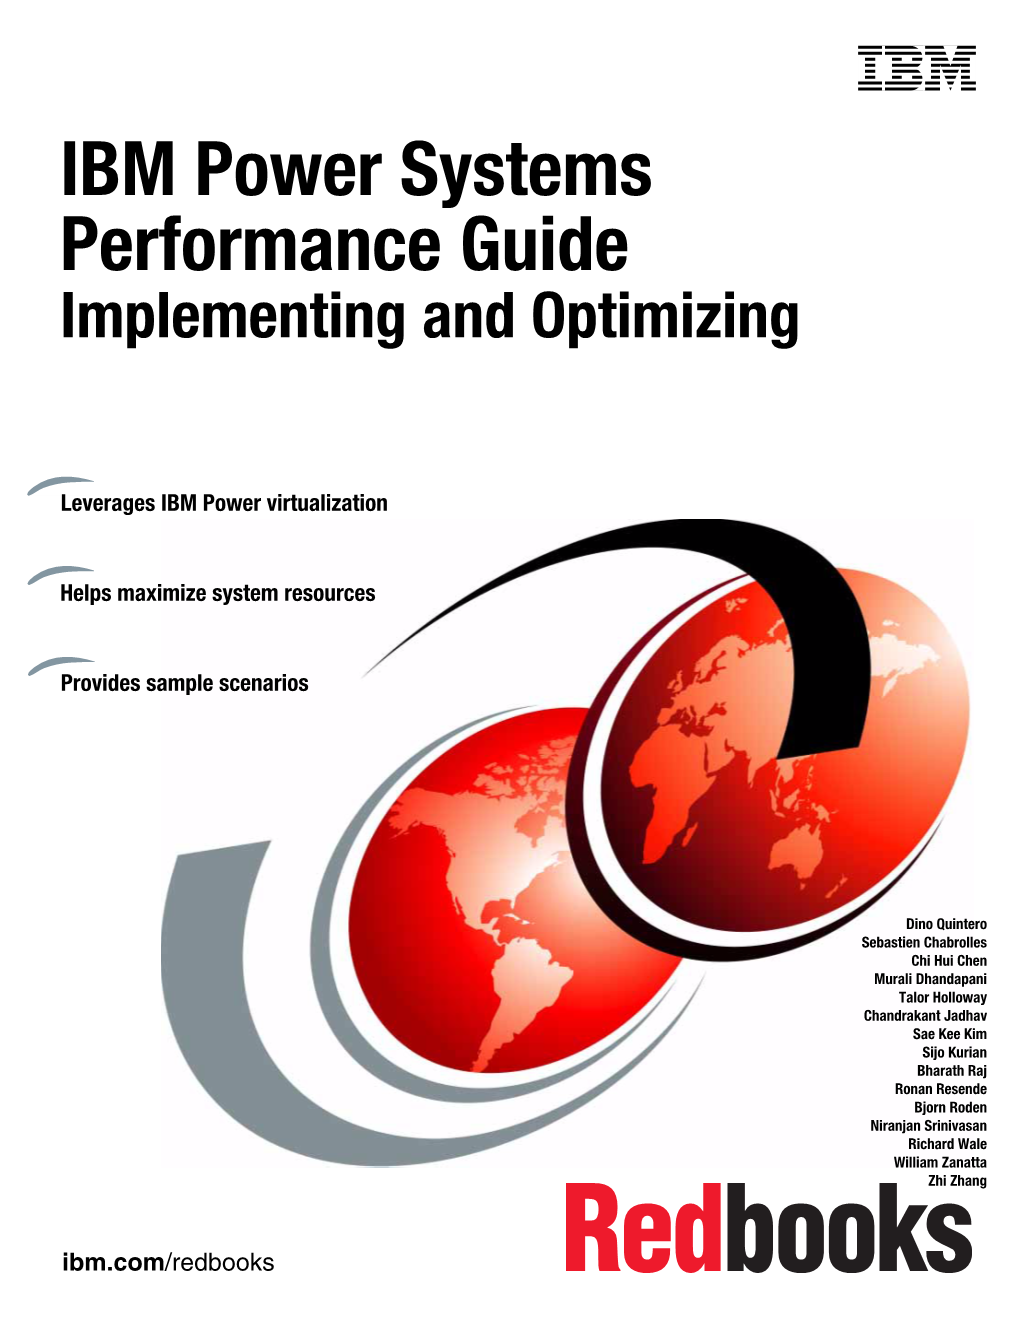 IBM Power Systems Performance Guide Implementing and Optimizing